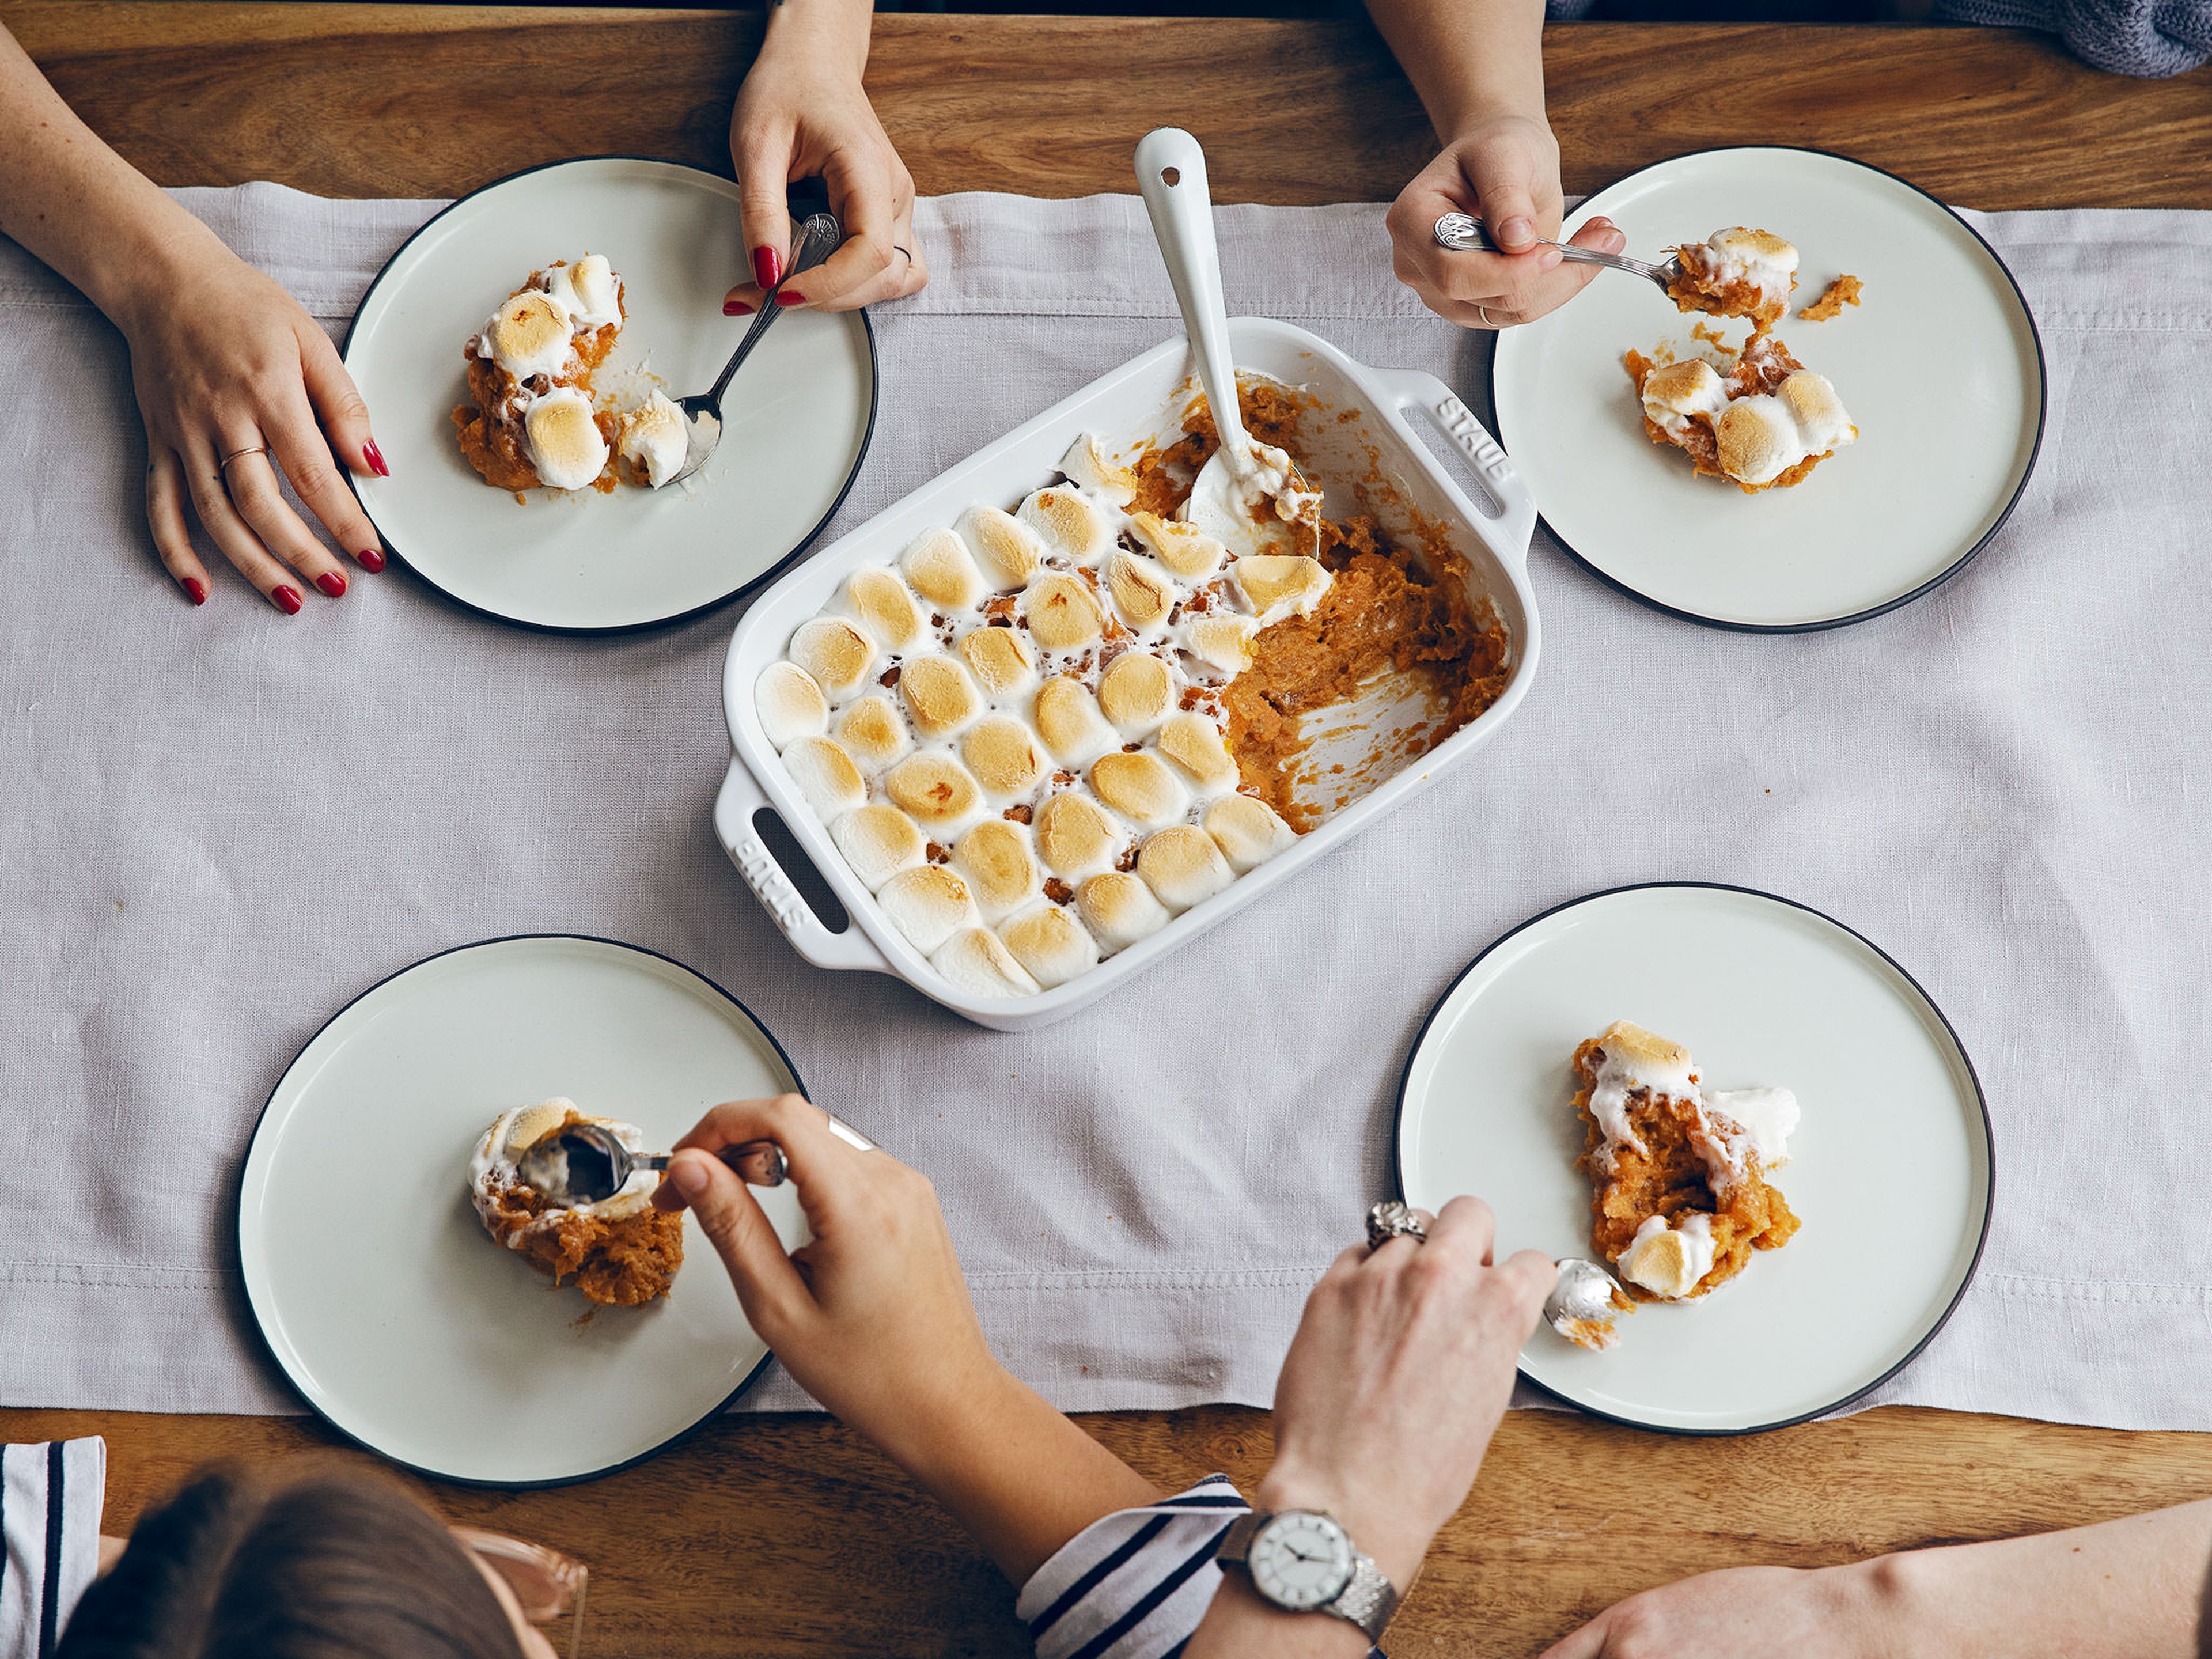 For the Thanksgiving table: Granny’s Sweet Potatoes and Marshmallows